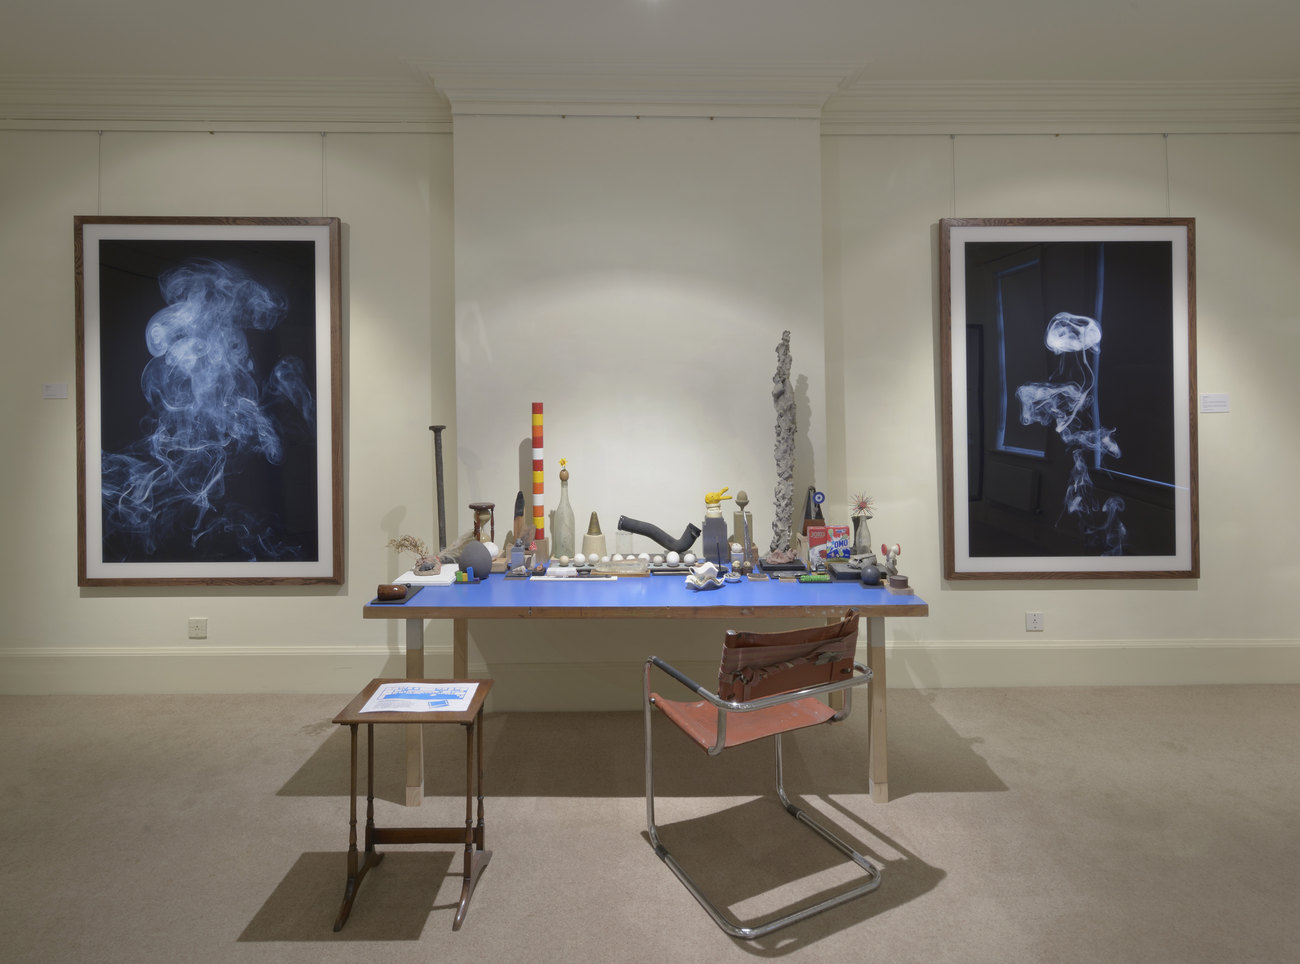 A blue desk covered with objects, many of them tall and long, with a red desk chair and a small table in front. On the white wall behind the desk are 2 large, framed photographs of billowing smoke against black backgrounds